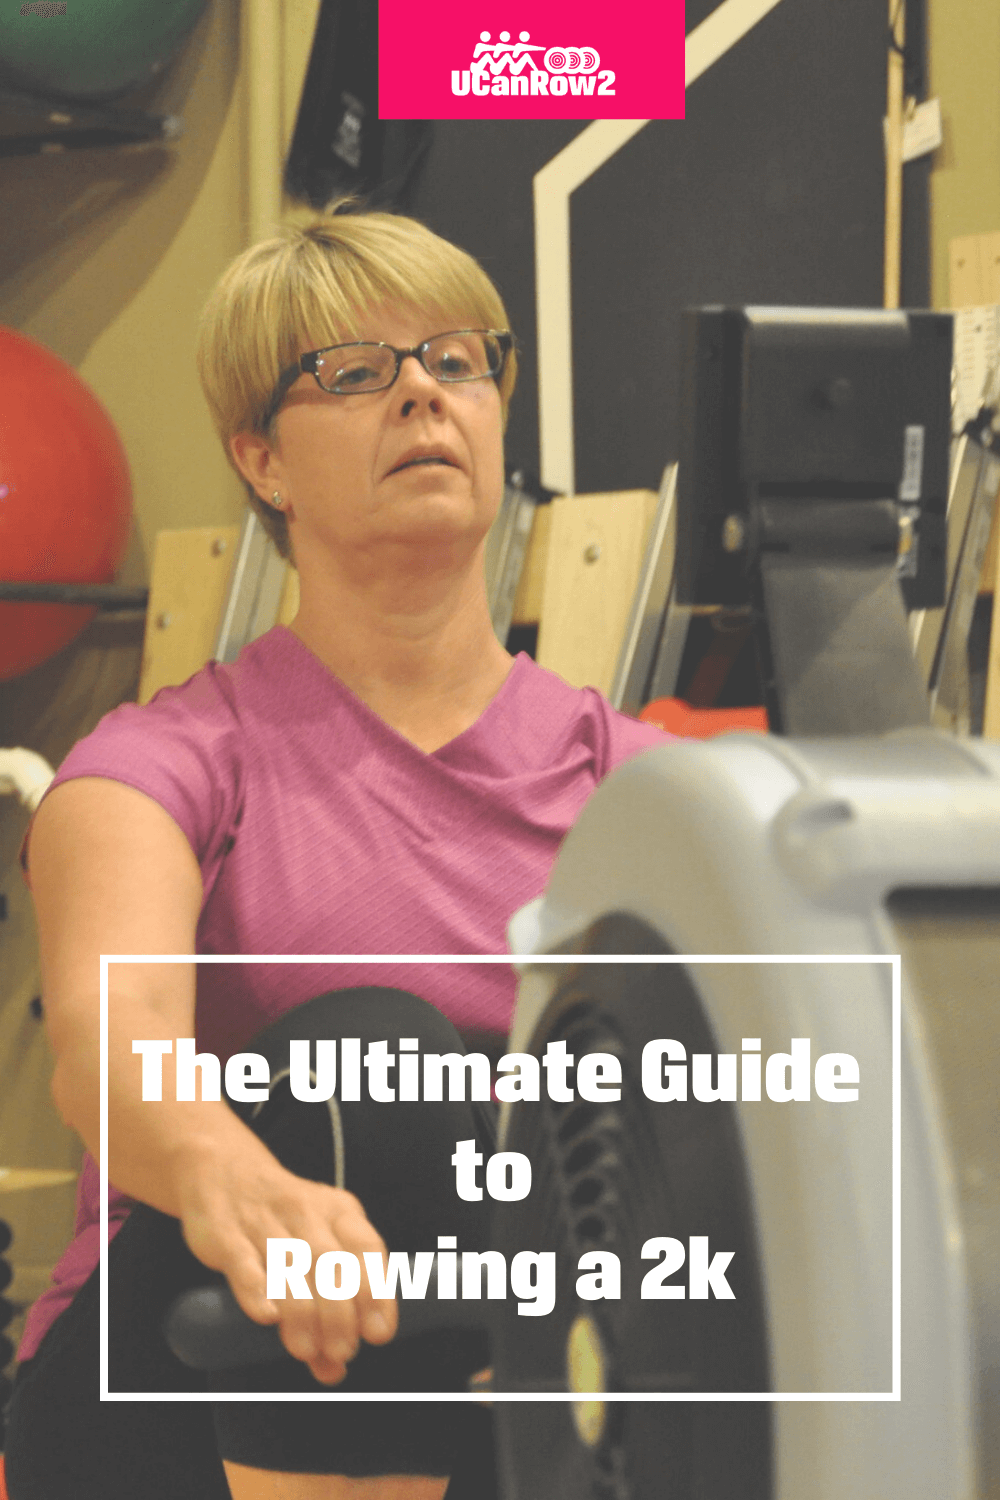 The Ultimate Guide to Rowing 2k